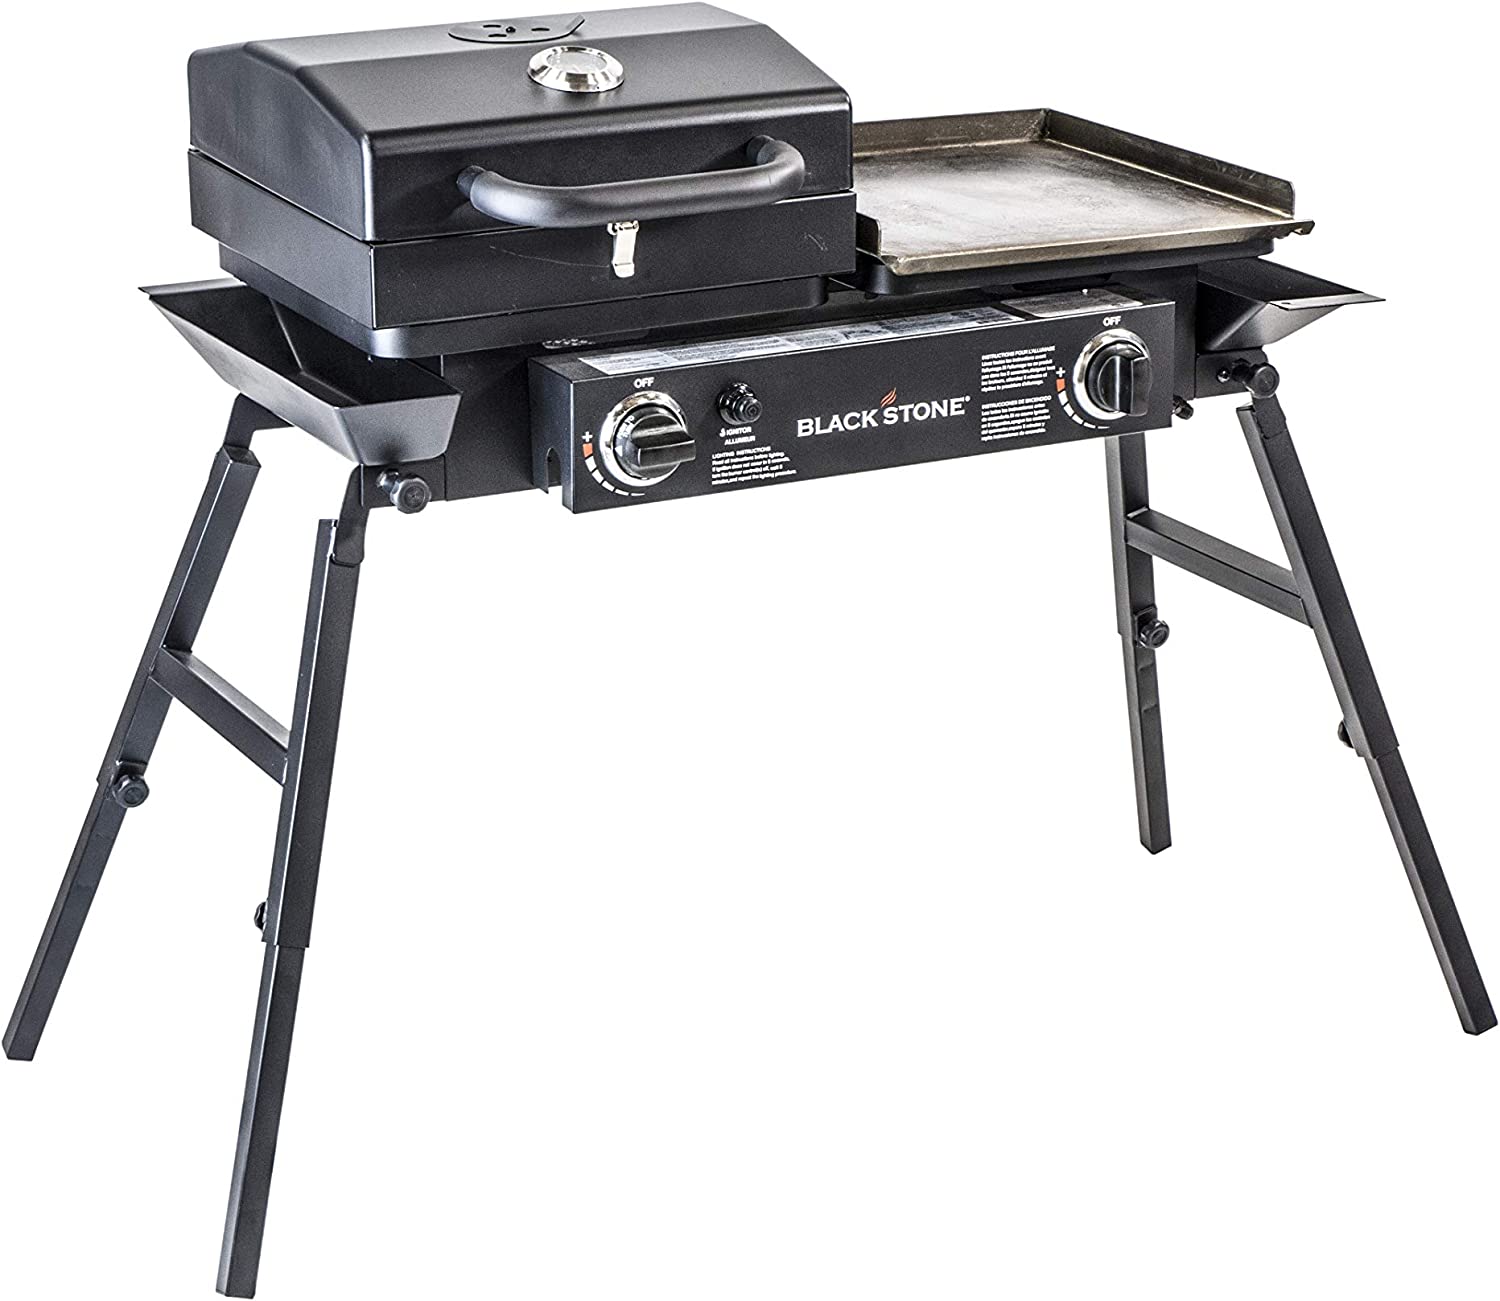 https://bigbigmart.com/wp-content/uploads/2023/06/Blackstone-Tailgater-Stainless-Steel-2-Burner-Portable-Gas-Grill-and-Griddle-Combo-Total-35000-BTUs-for-Indoor-or-Backyard-Outdoor-Patio-Picnic-Garden-Cooking.jpg